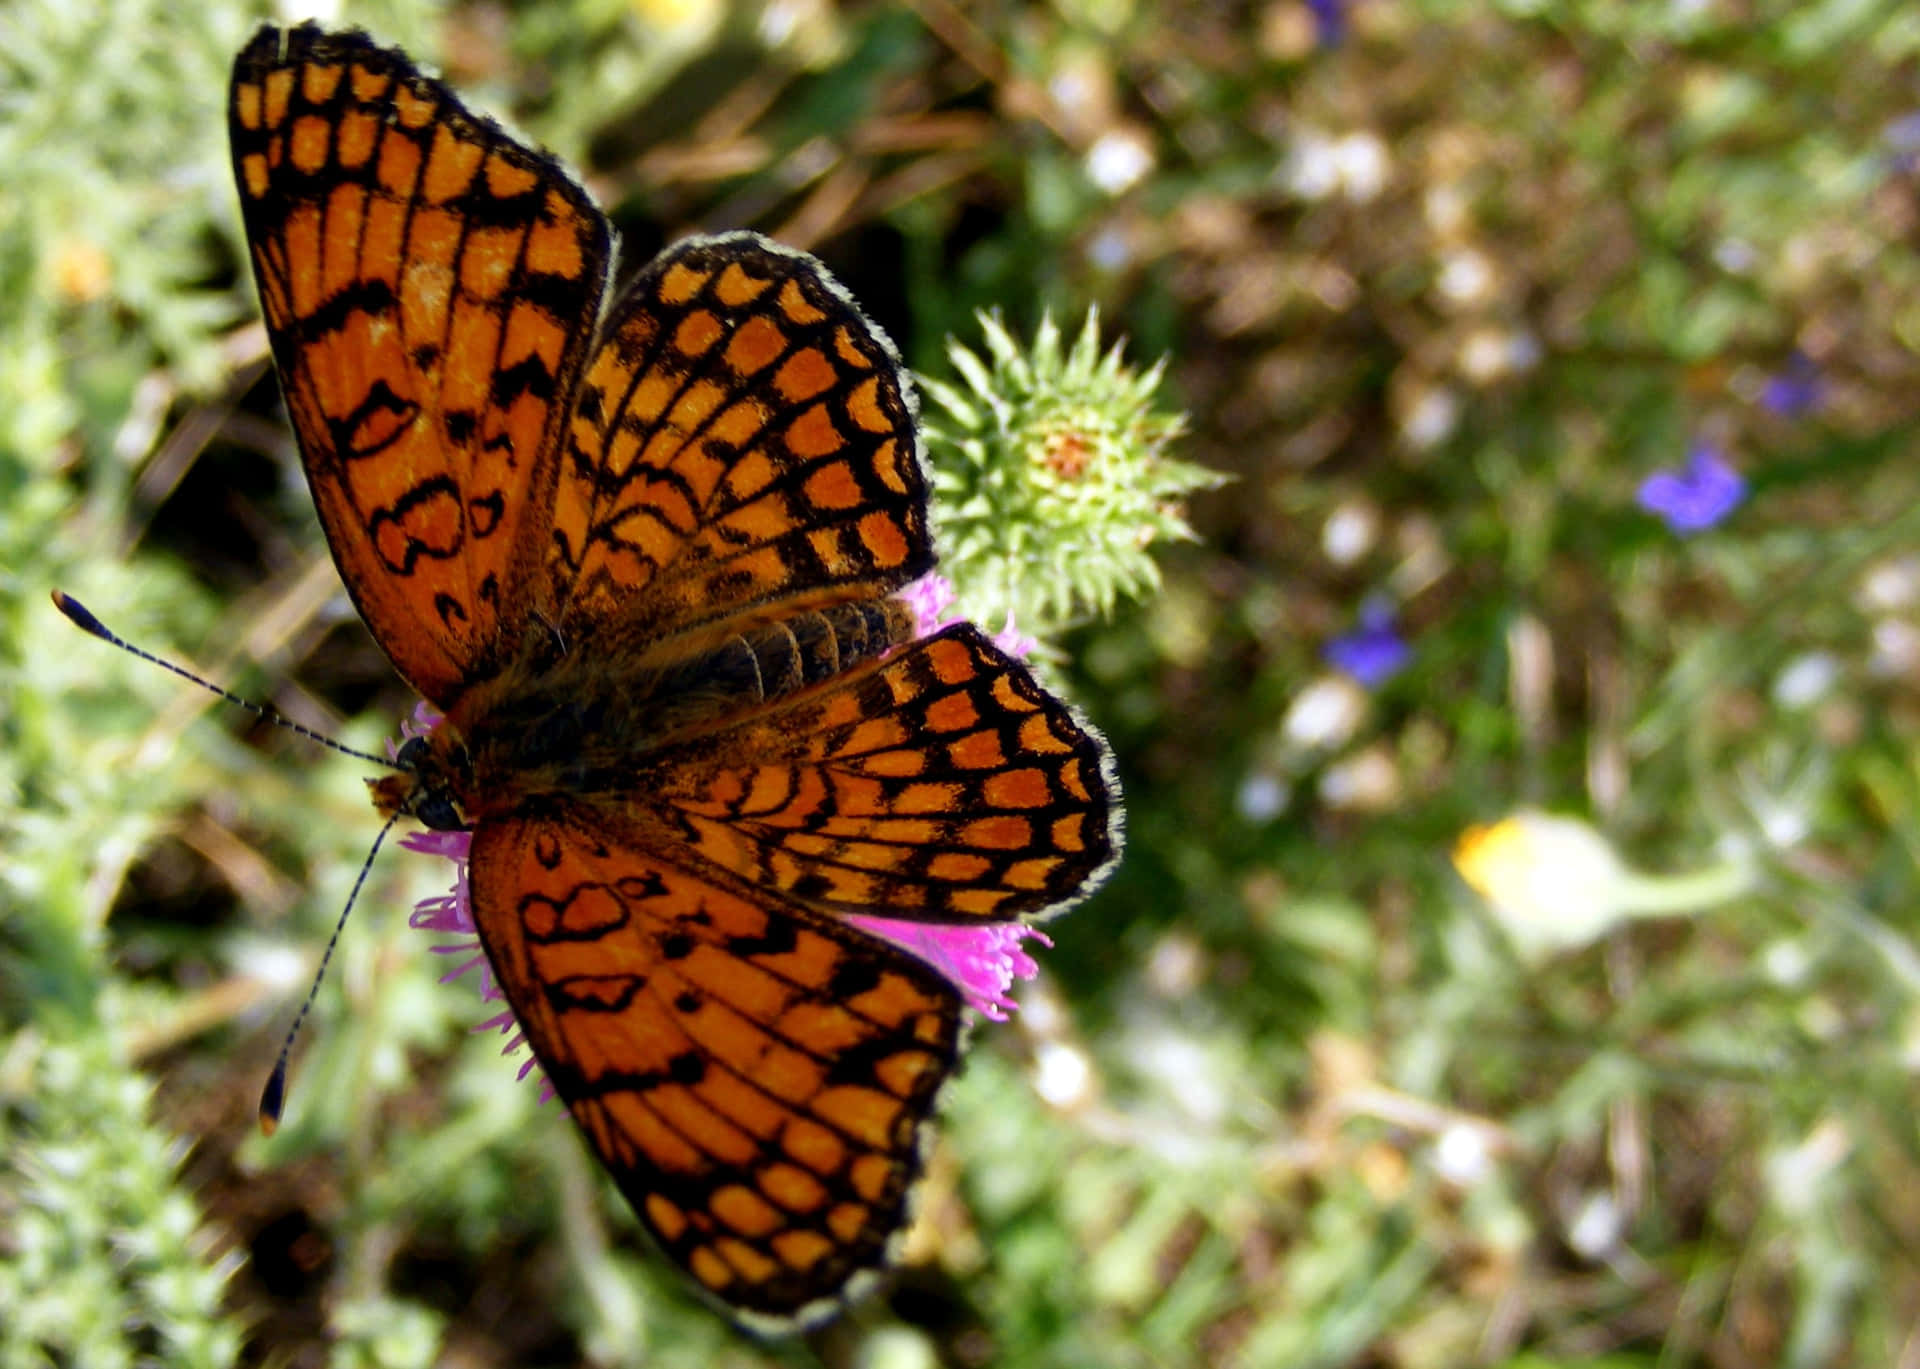 A beautiful butterfly flutters amidst vibrant colored flower petals